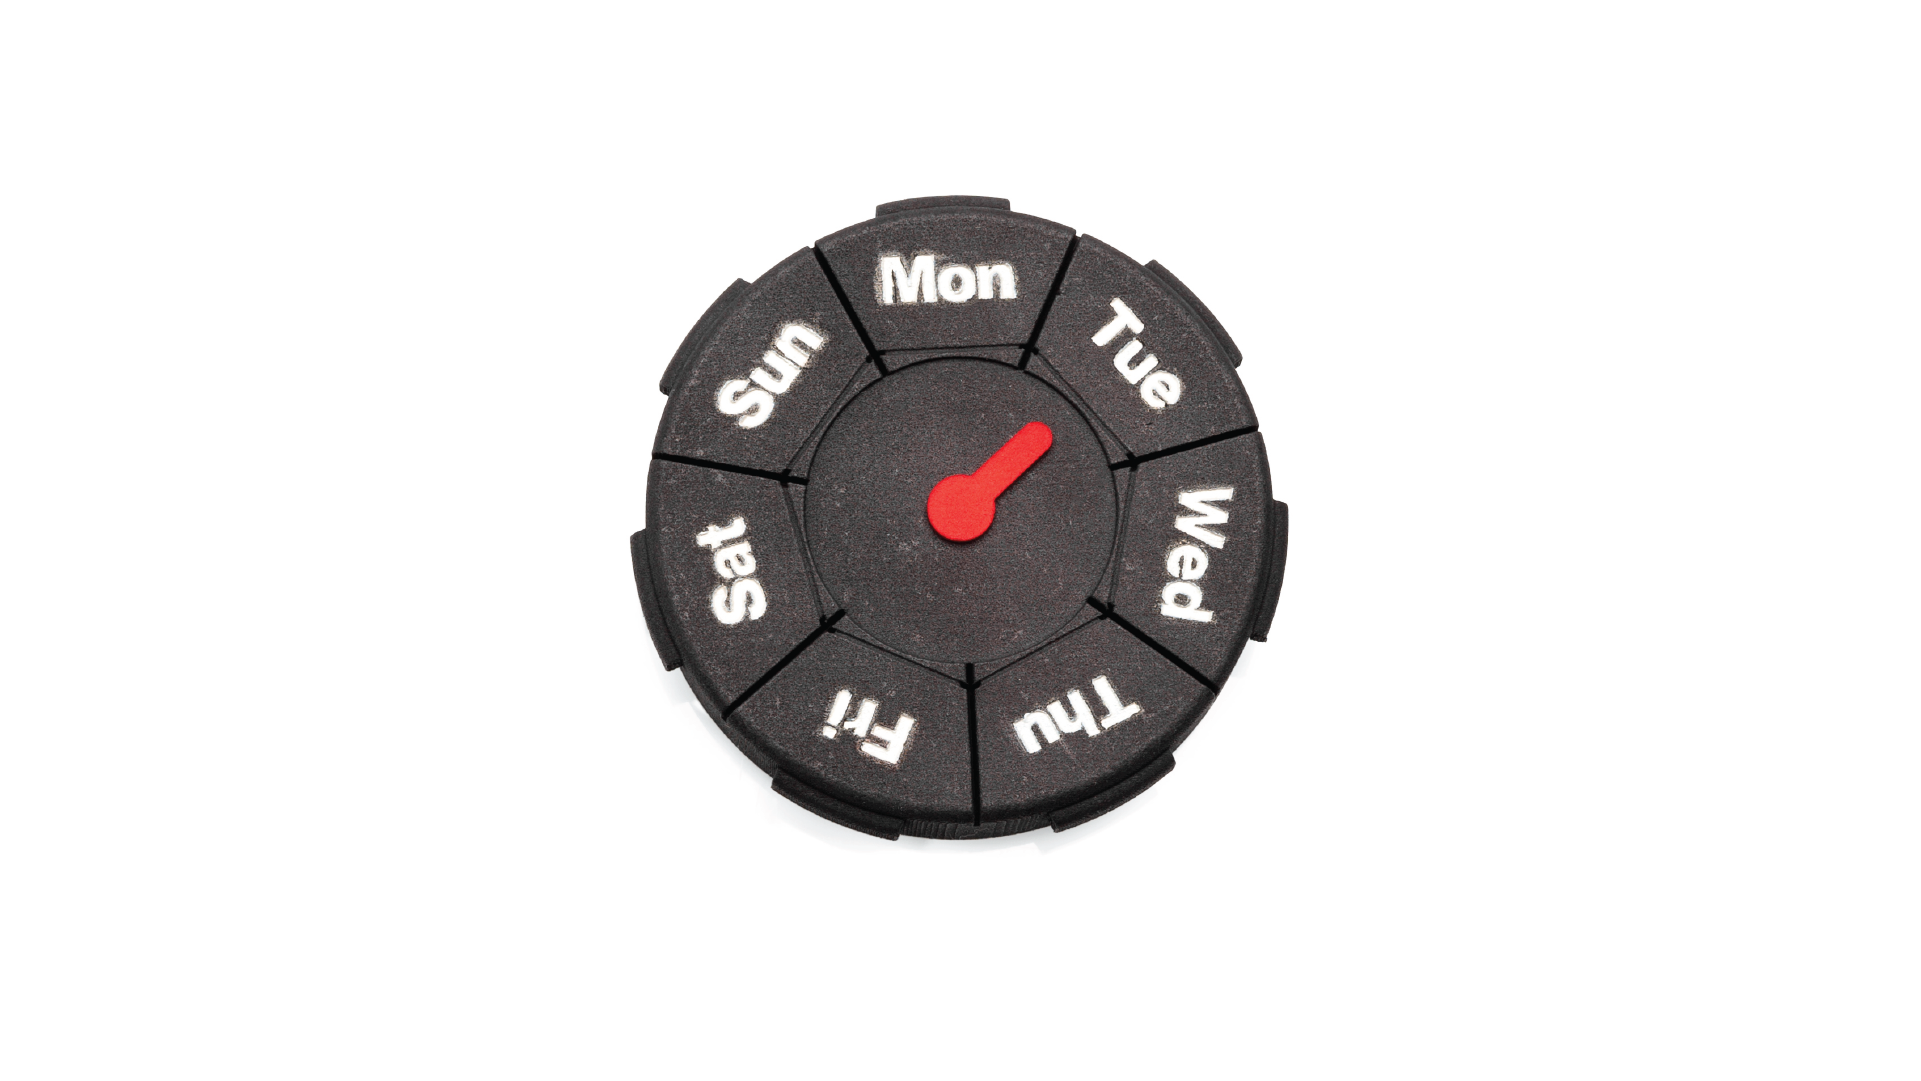 Pill case in a circular shape with the seven days of the week placed around. In the middle of the case, there's an indicator for what day of the week is today.